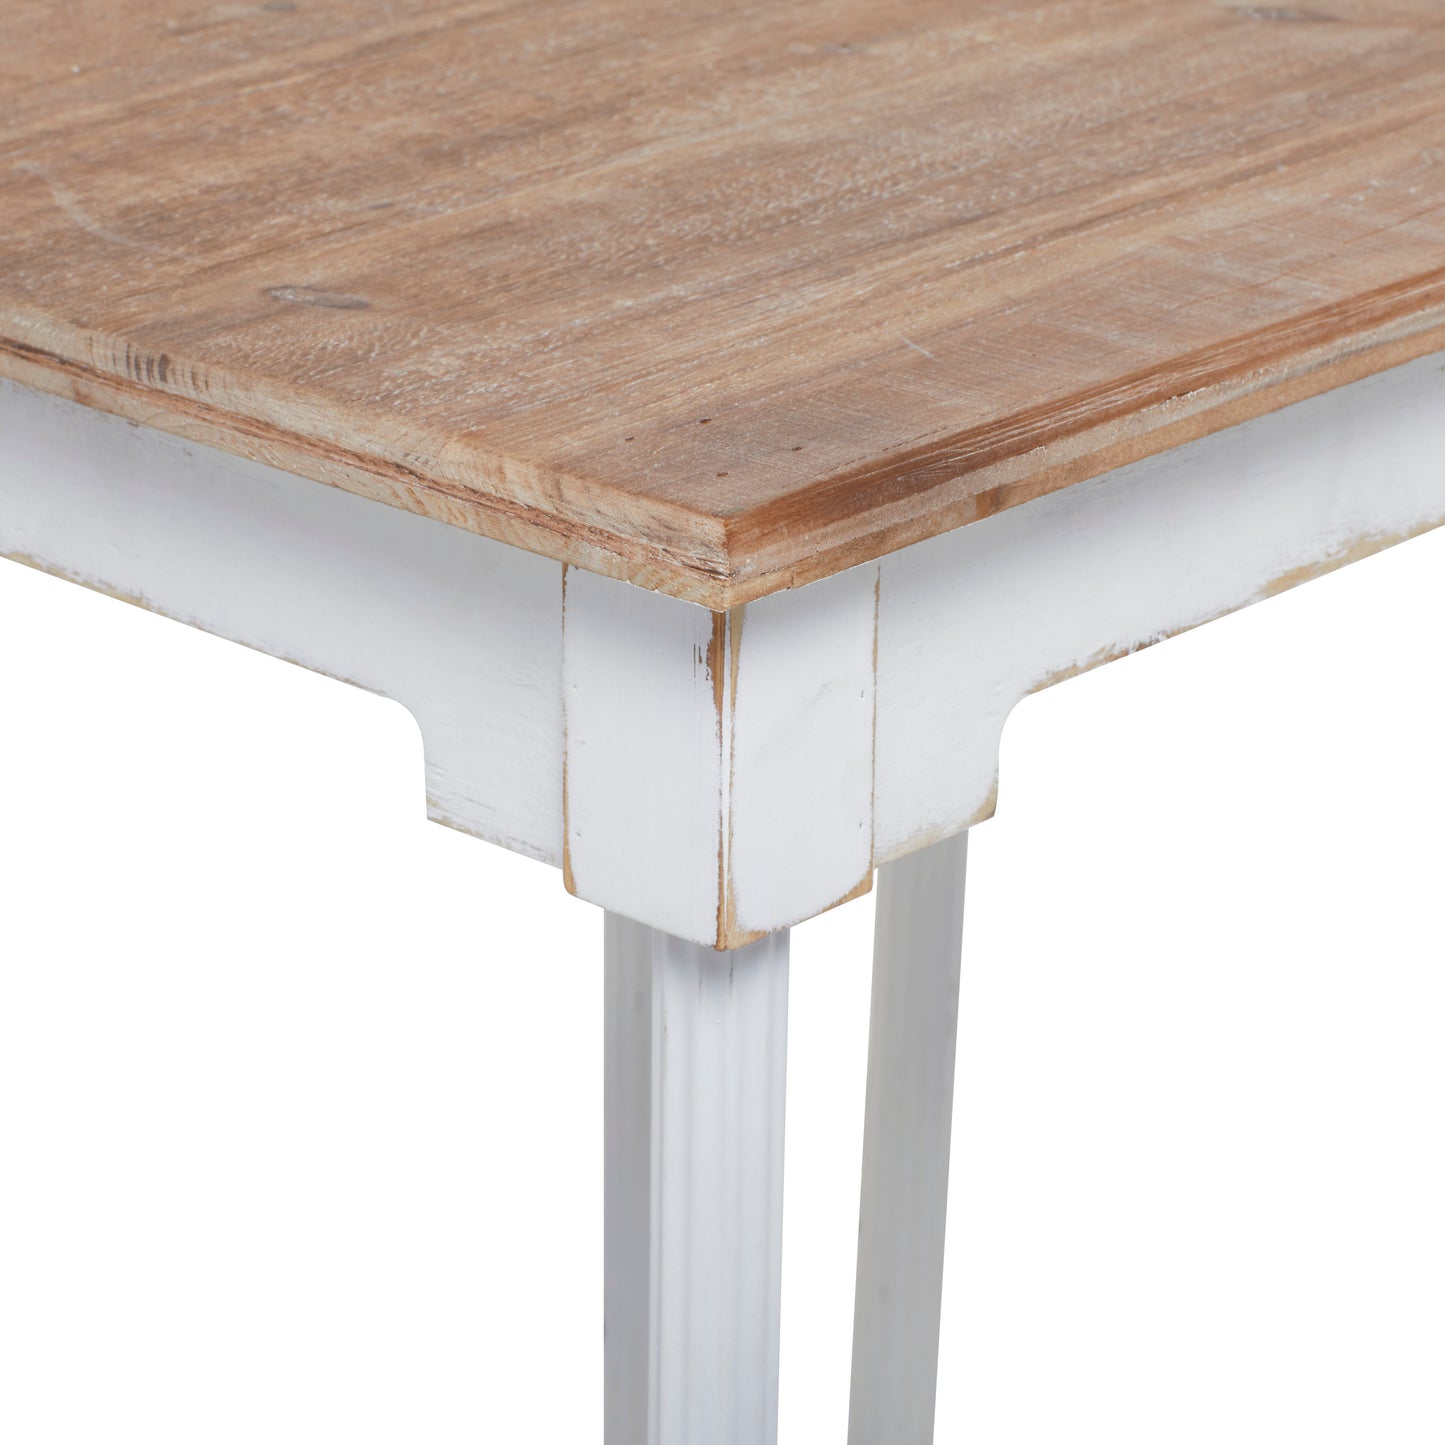 Table Stand Distressed Farmhouse Wood White & Natural 24"h